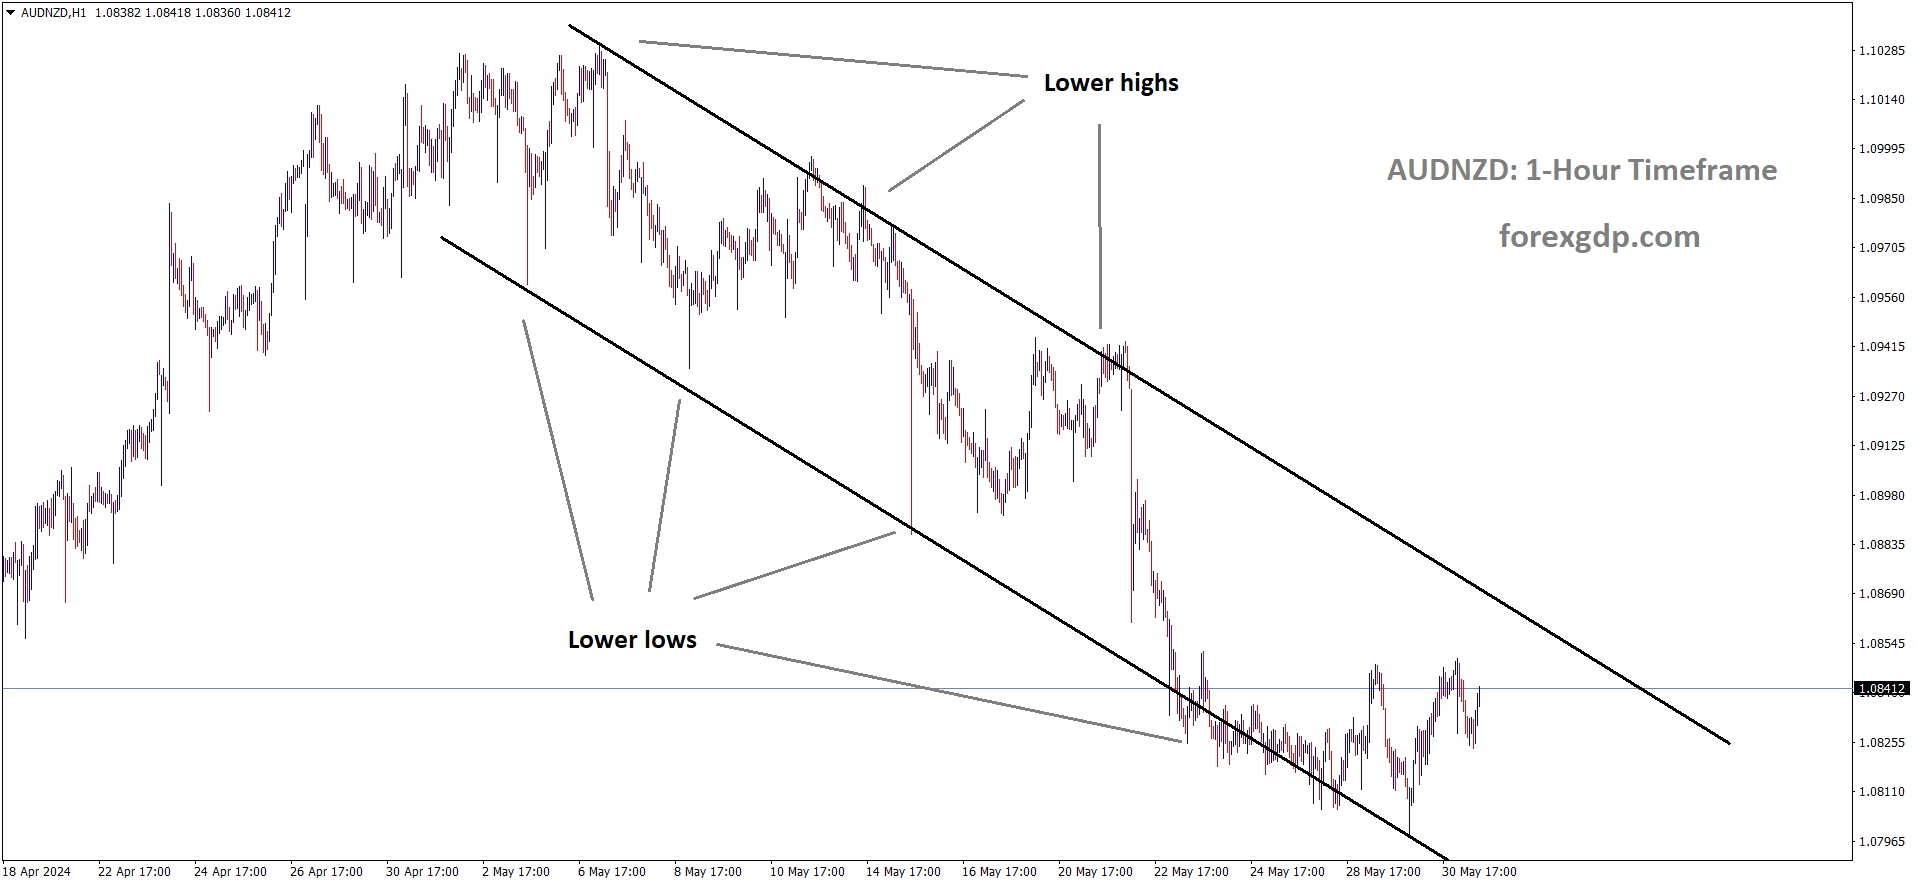 AUDNZD is moving in the Descending channel and the market has rebounded from the lower low area of the channel